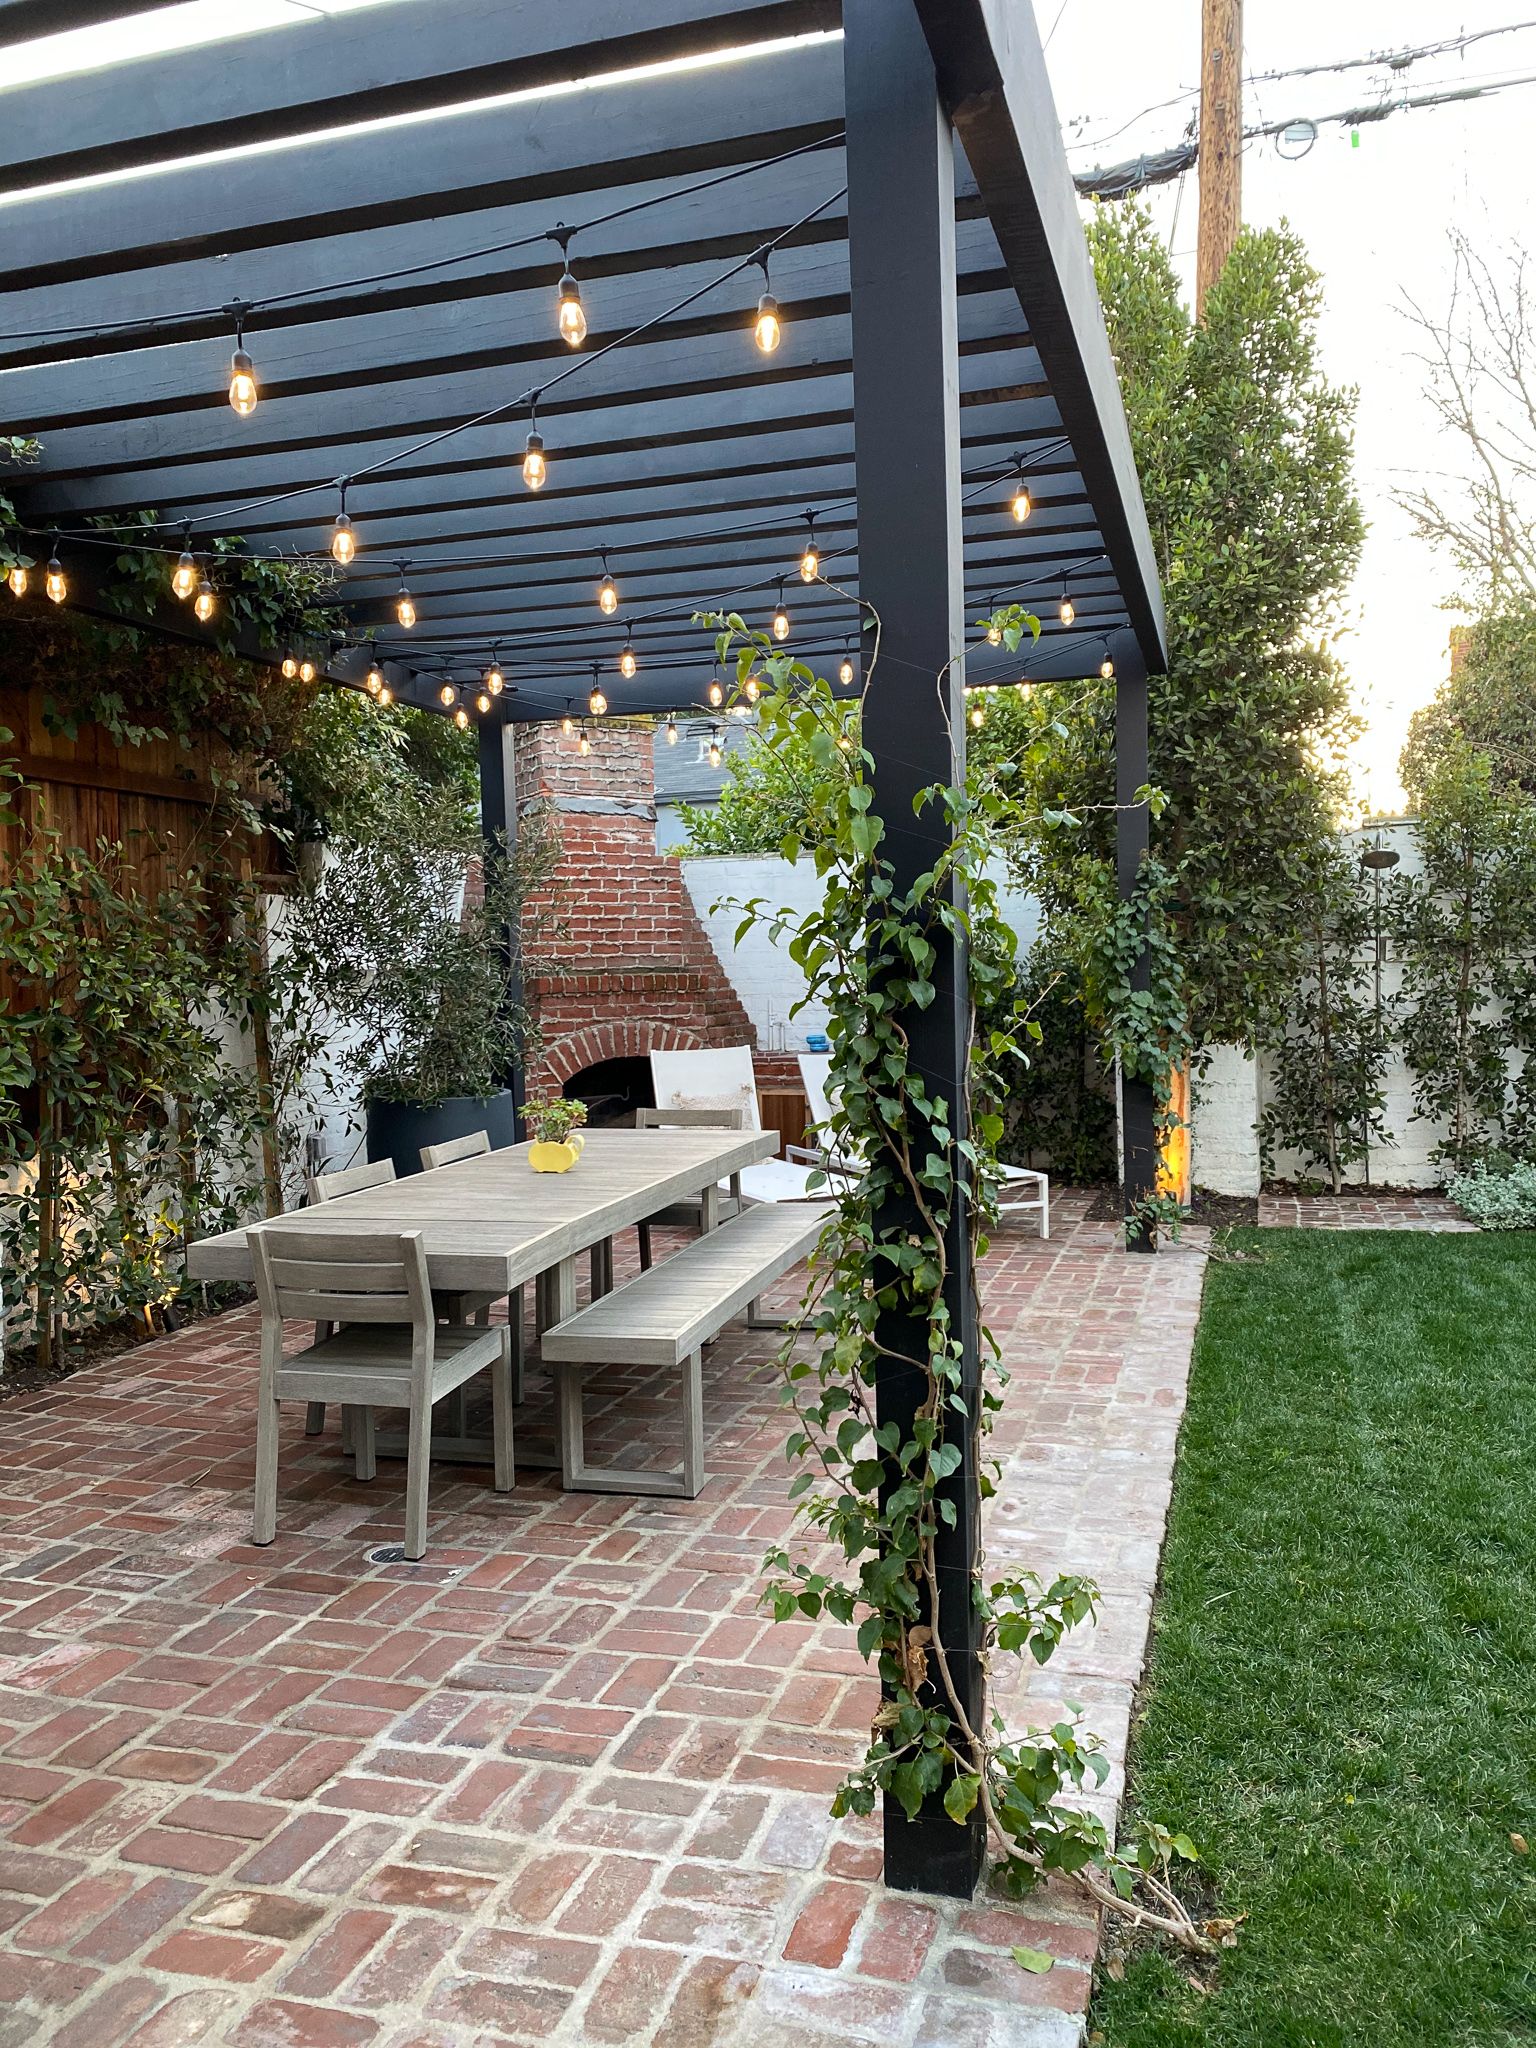 Creating an Outdoor Oasis with a Modern
Pergola Design